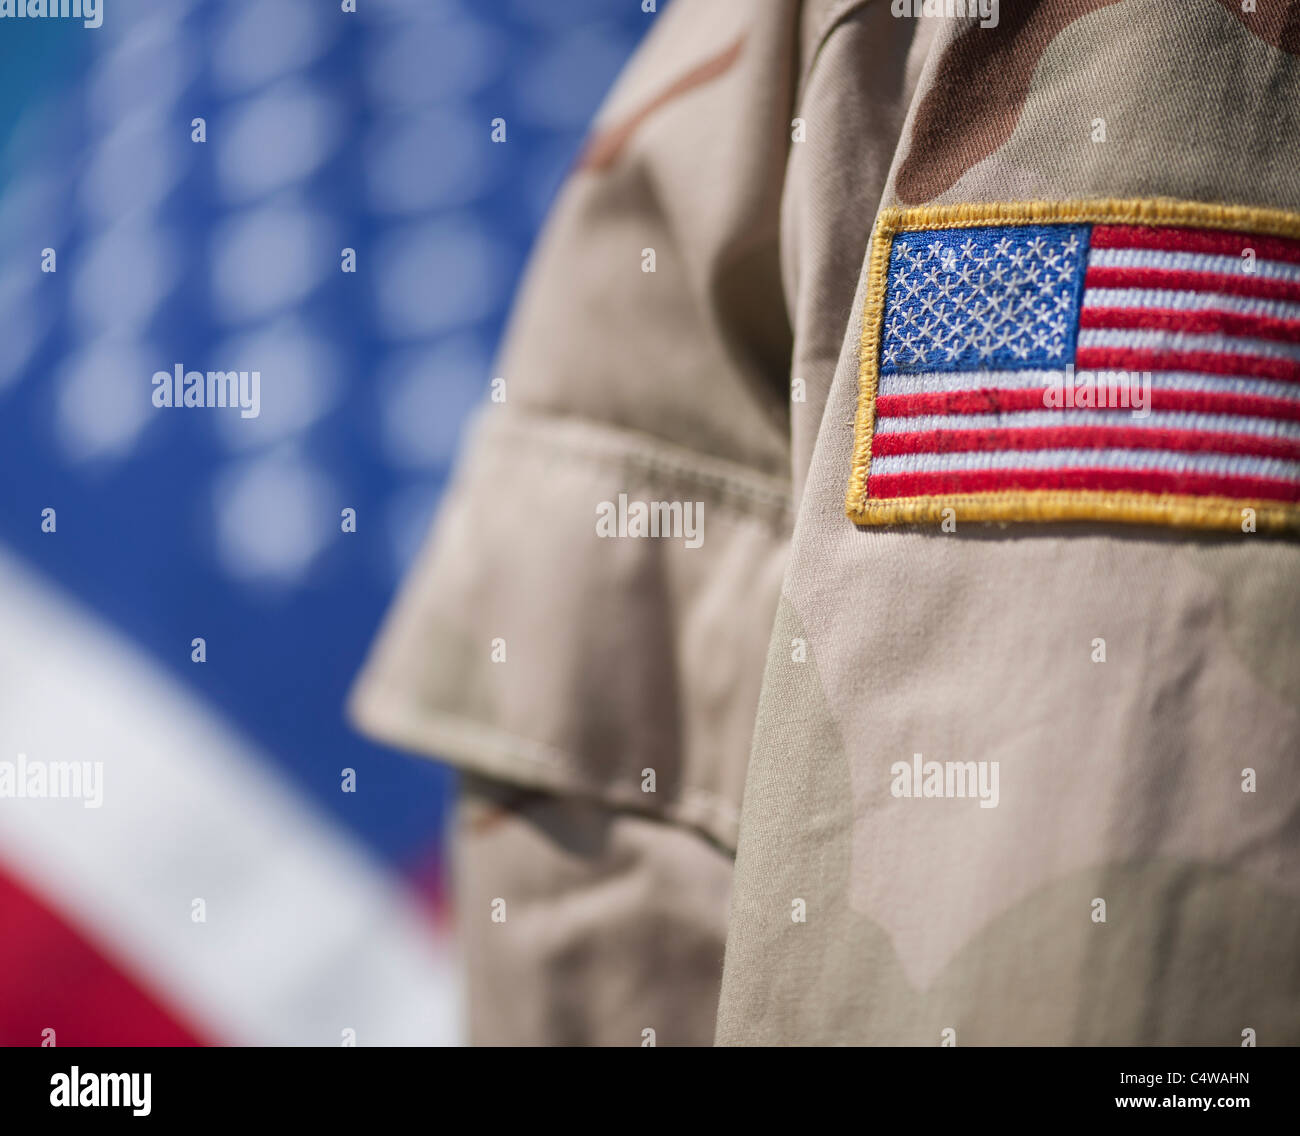 Close-up of badge with American flag on US military uniform Stock Photo